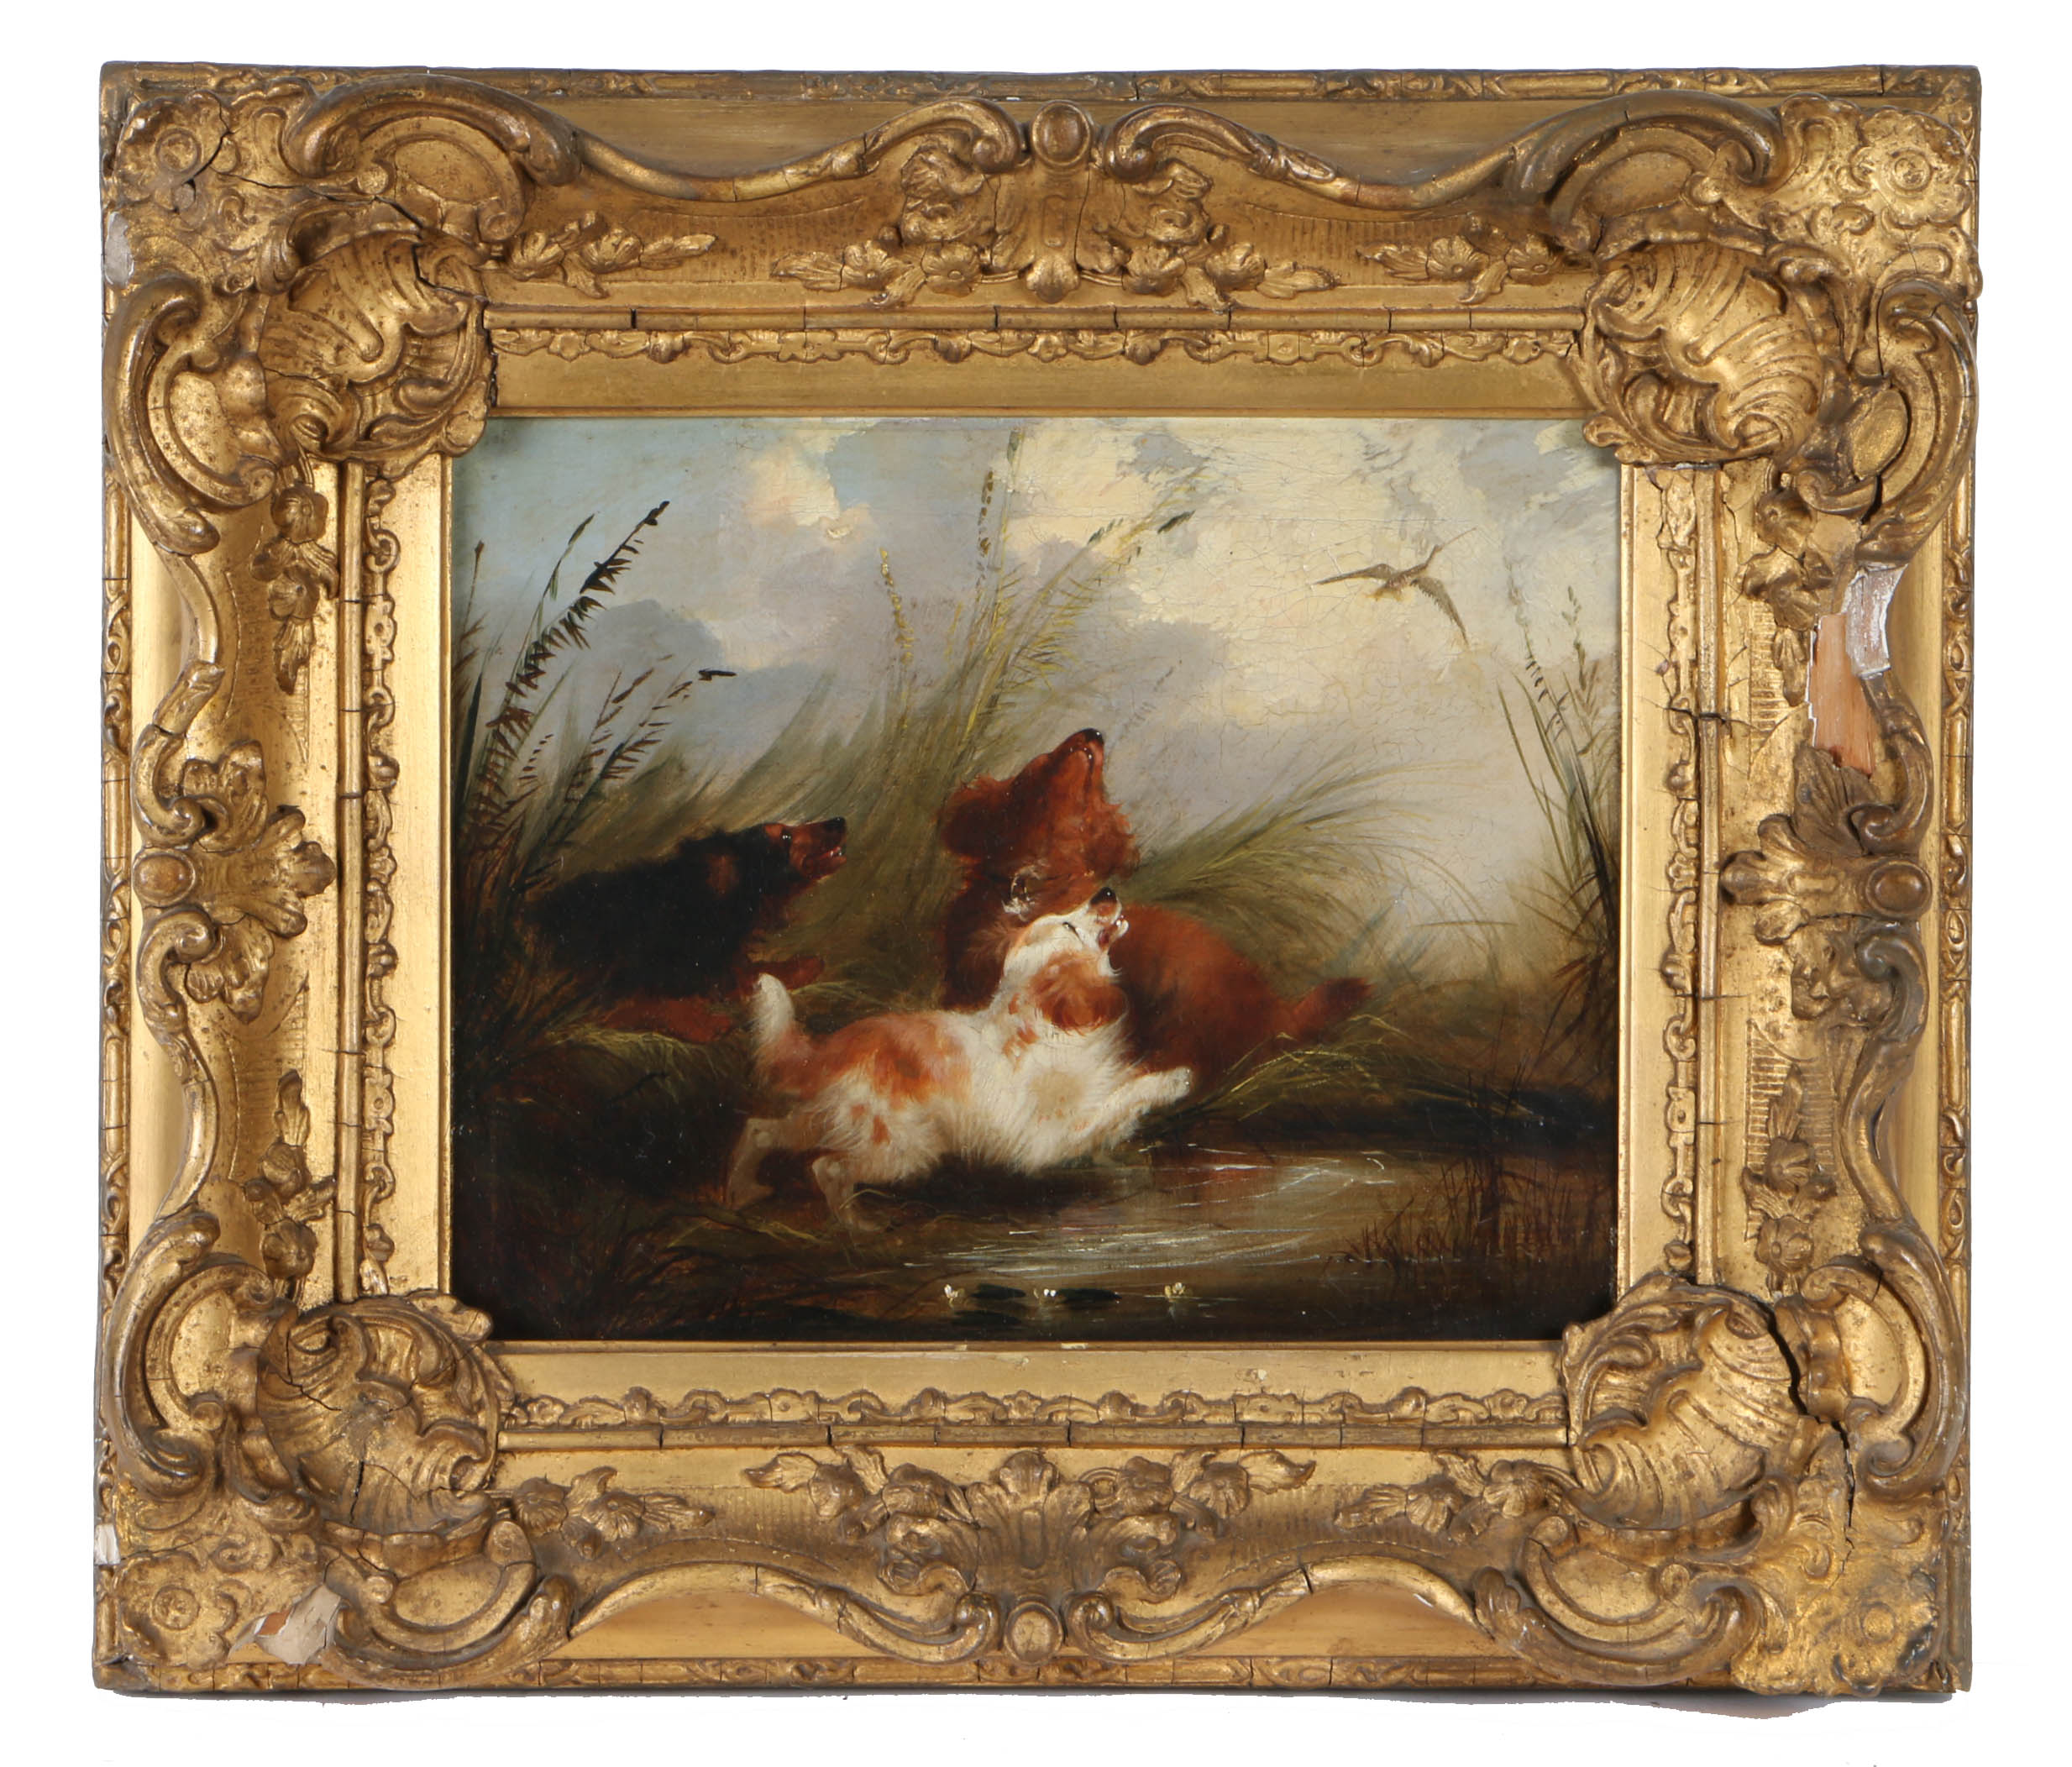 Attributed to George Armfield (British, 1808-1893) Spaniels and Terriers pair of oils on canvas 19 x - Image 2 of 3